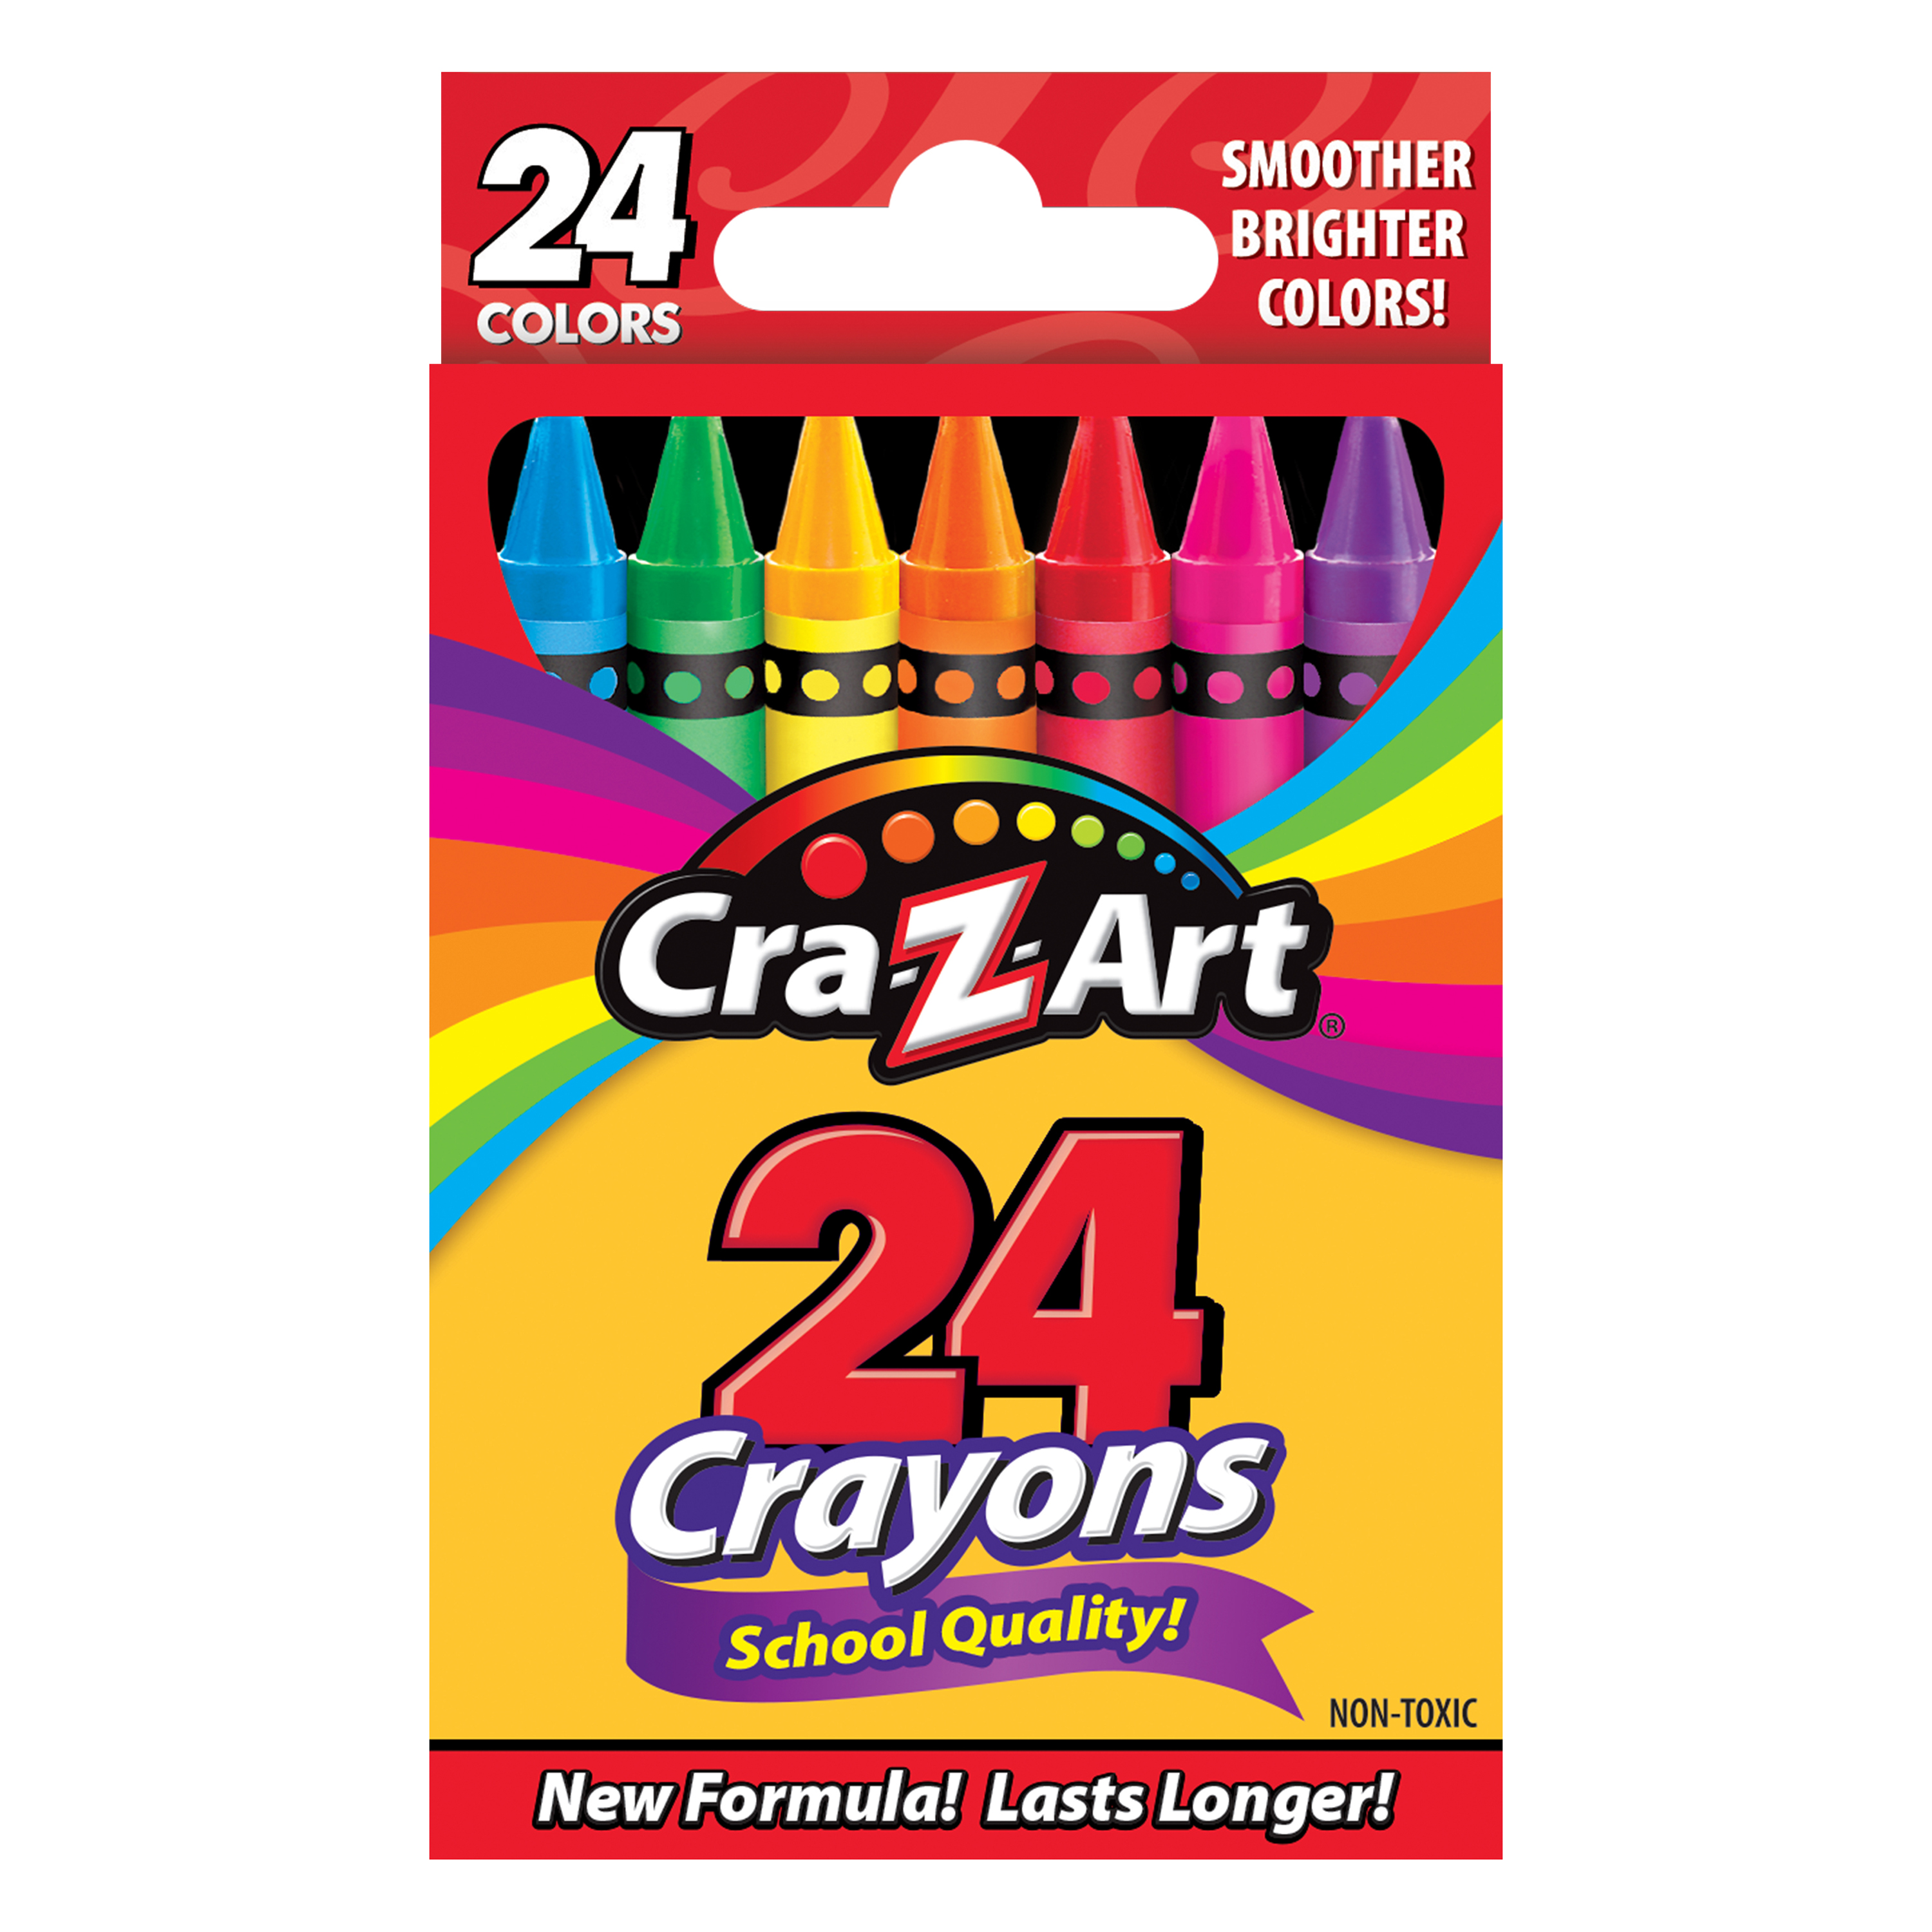 Cra-Z-Art School Quality Multicolor Crayons, 24 Count, Back to School Supplies - image 3 of 11